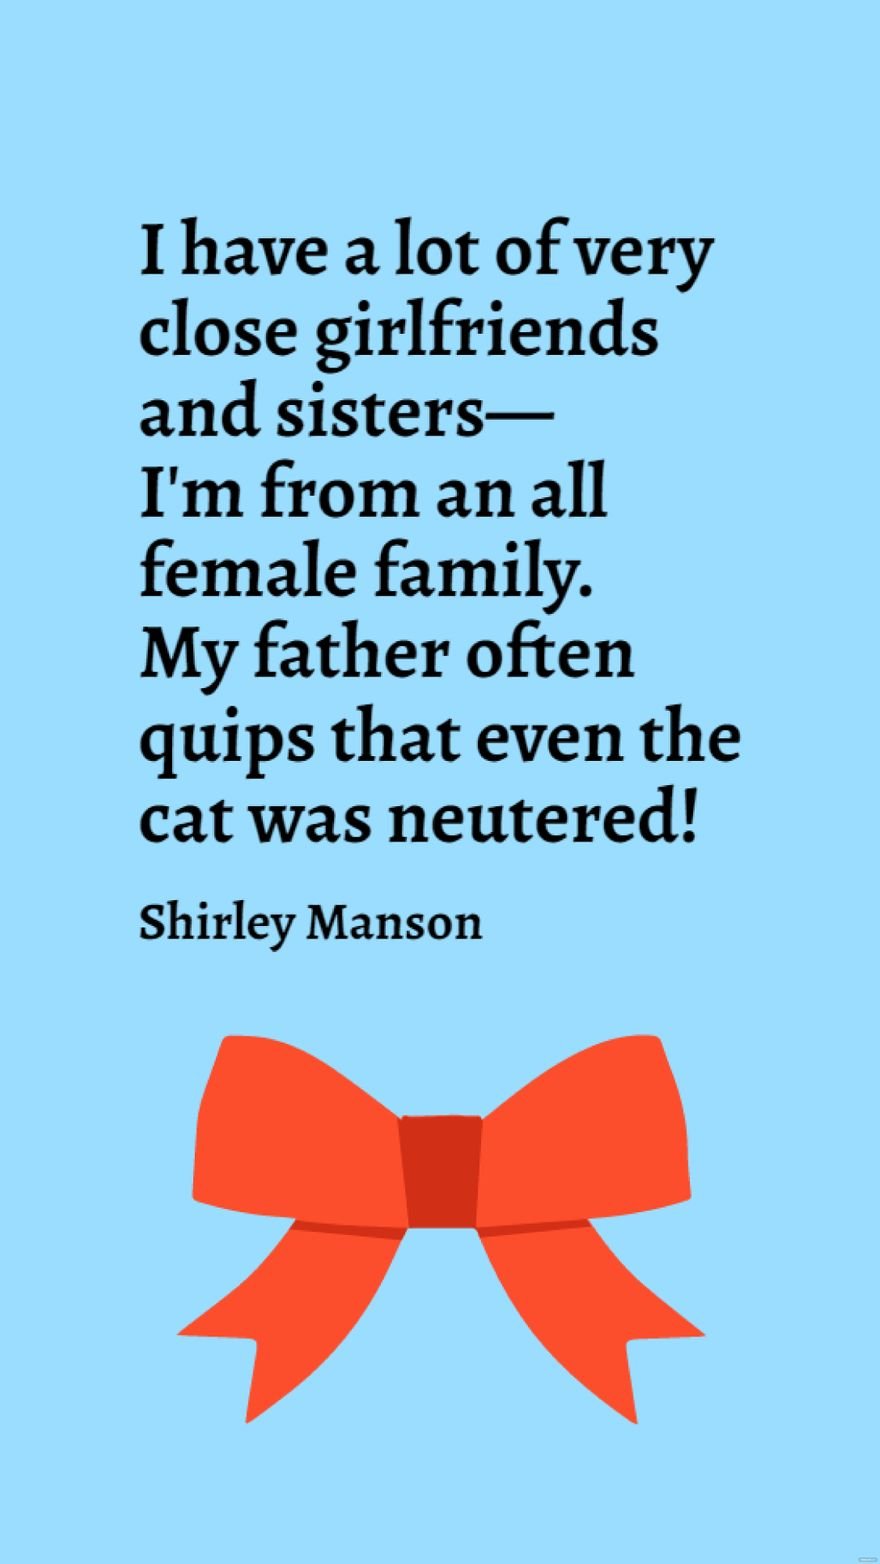 Shirley Manson - I have a lot of very close girlfriends and sisters - I'm from an all female family. My father often quips that even the cat was neutered!